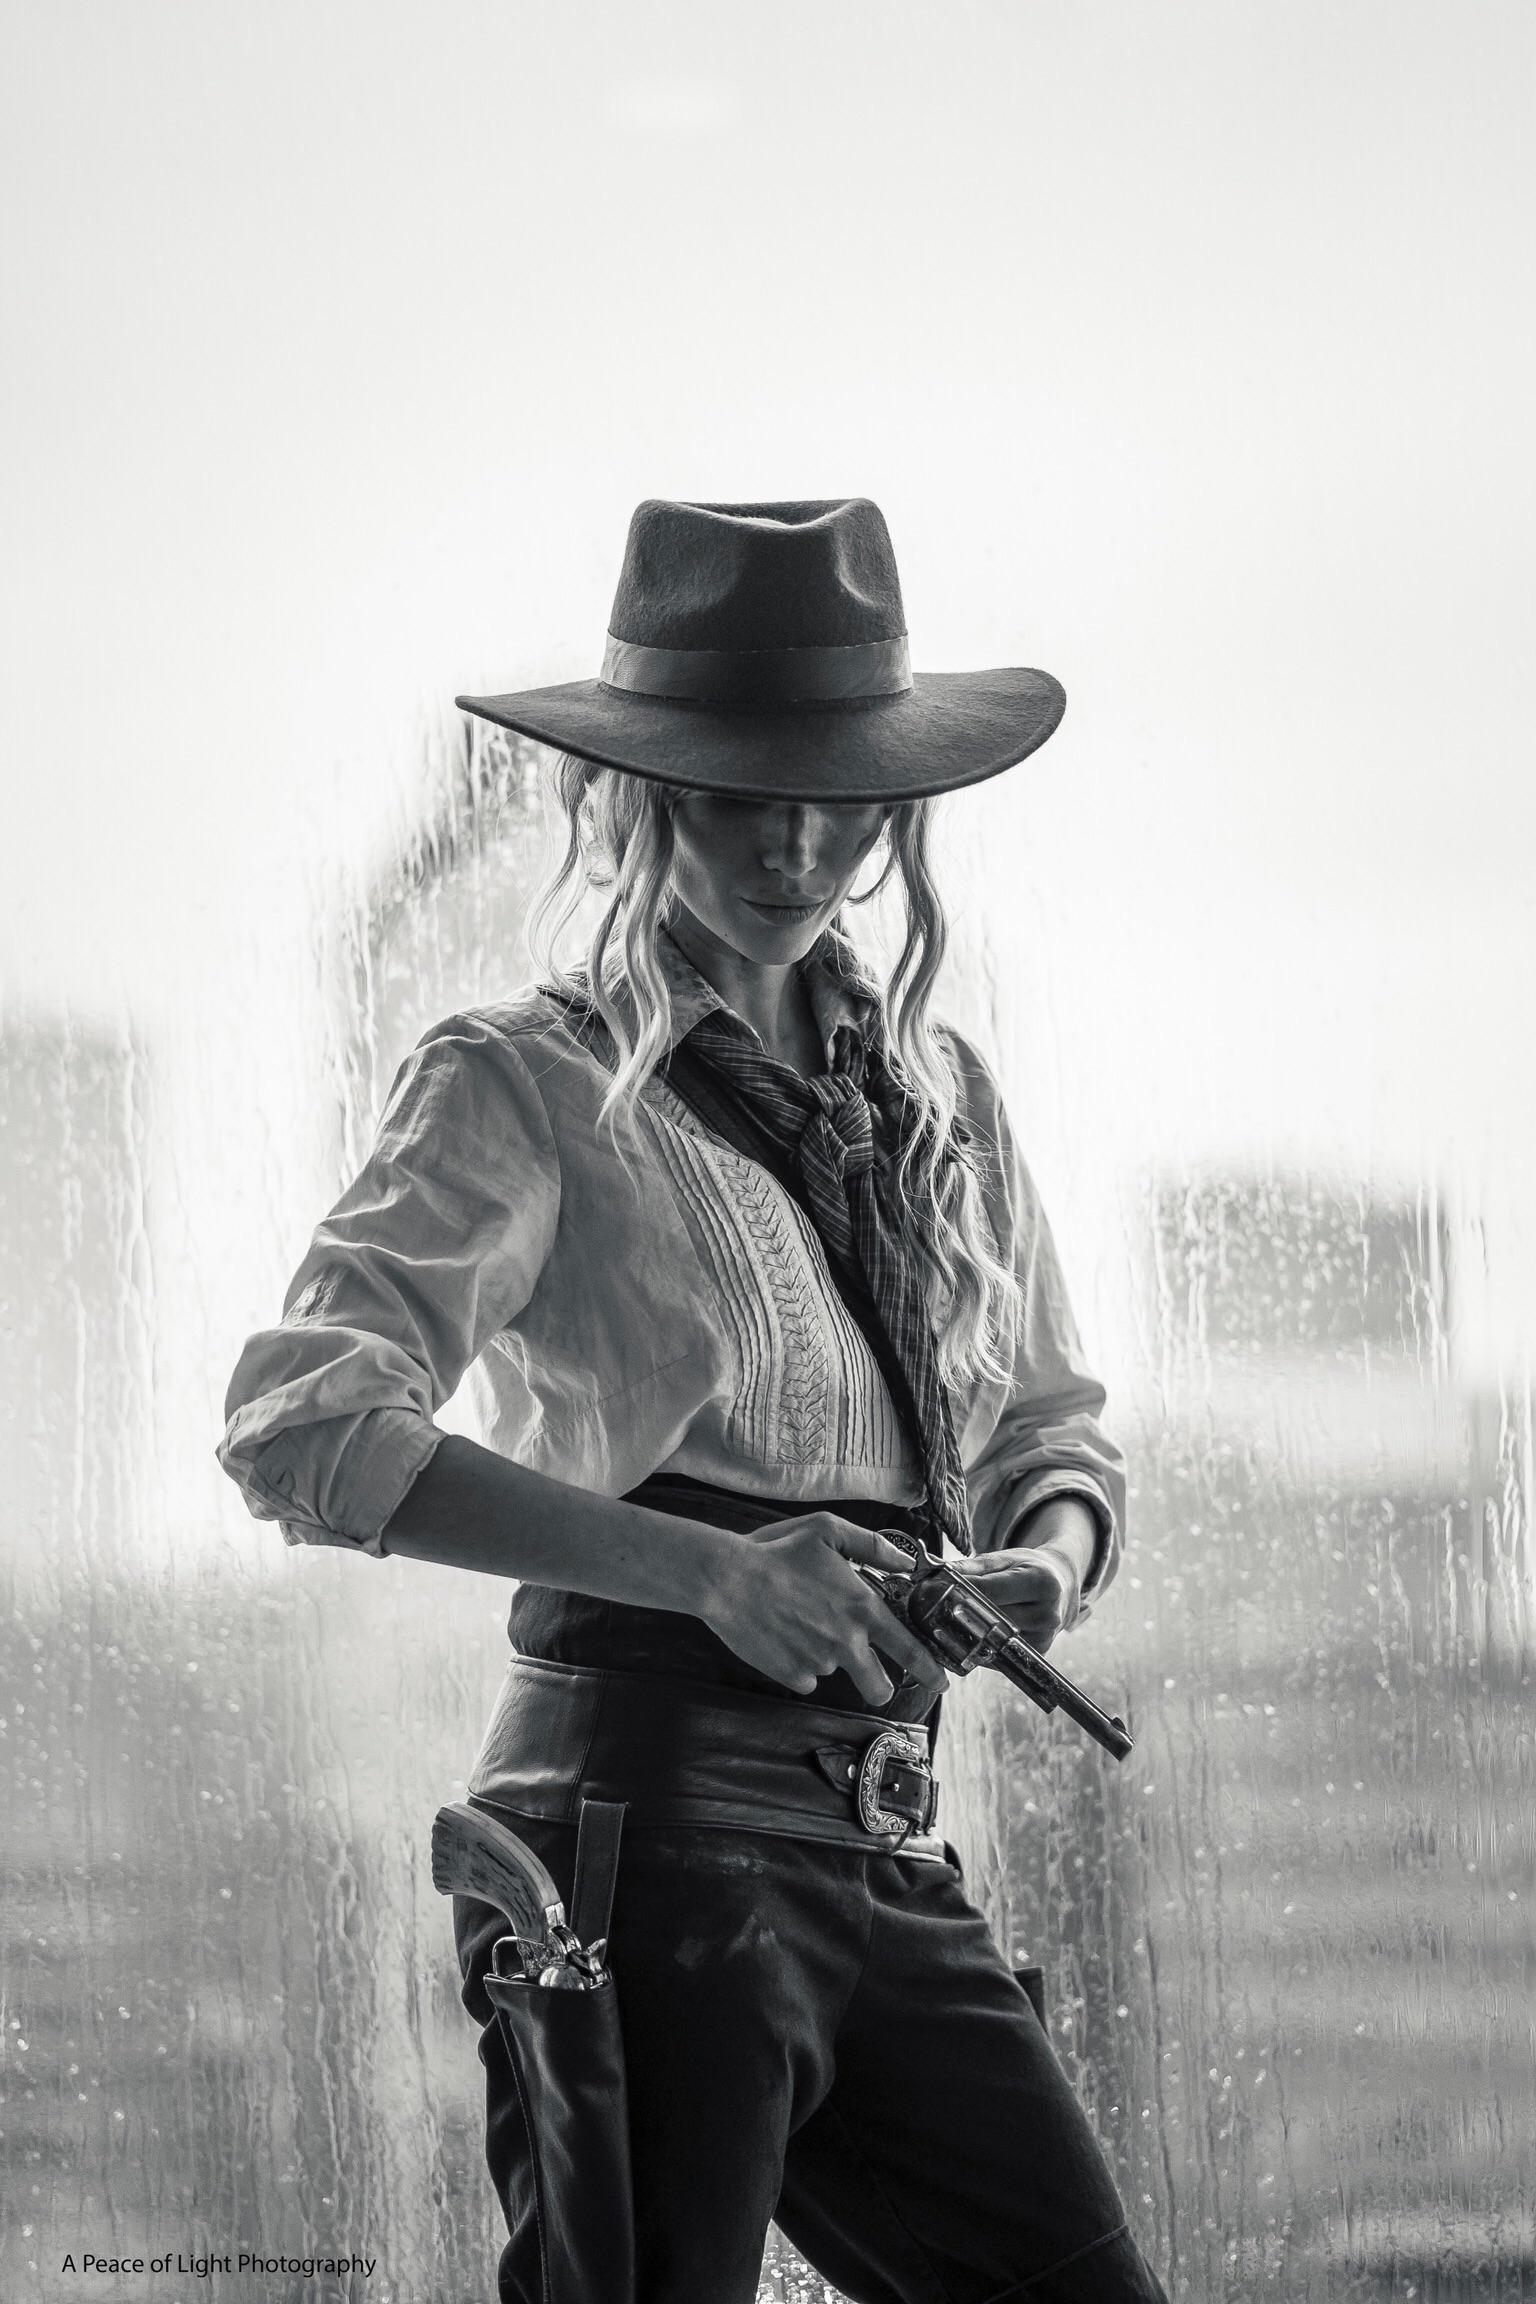 We're more ghosts than people. Here is my Sadie Adler cosplay! I swear the colors are right - I just loved the black and white mood